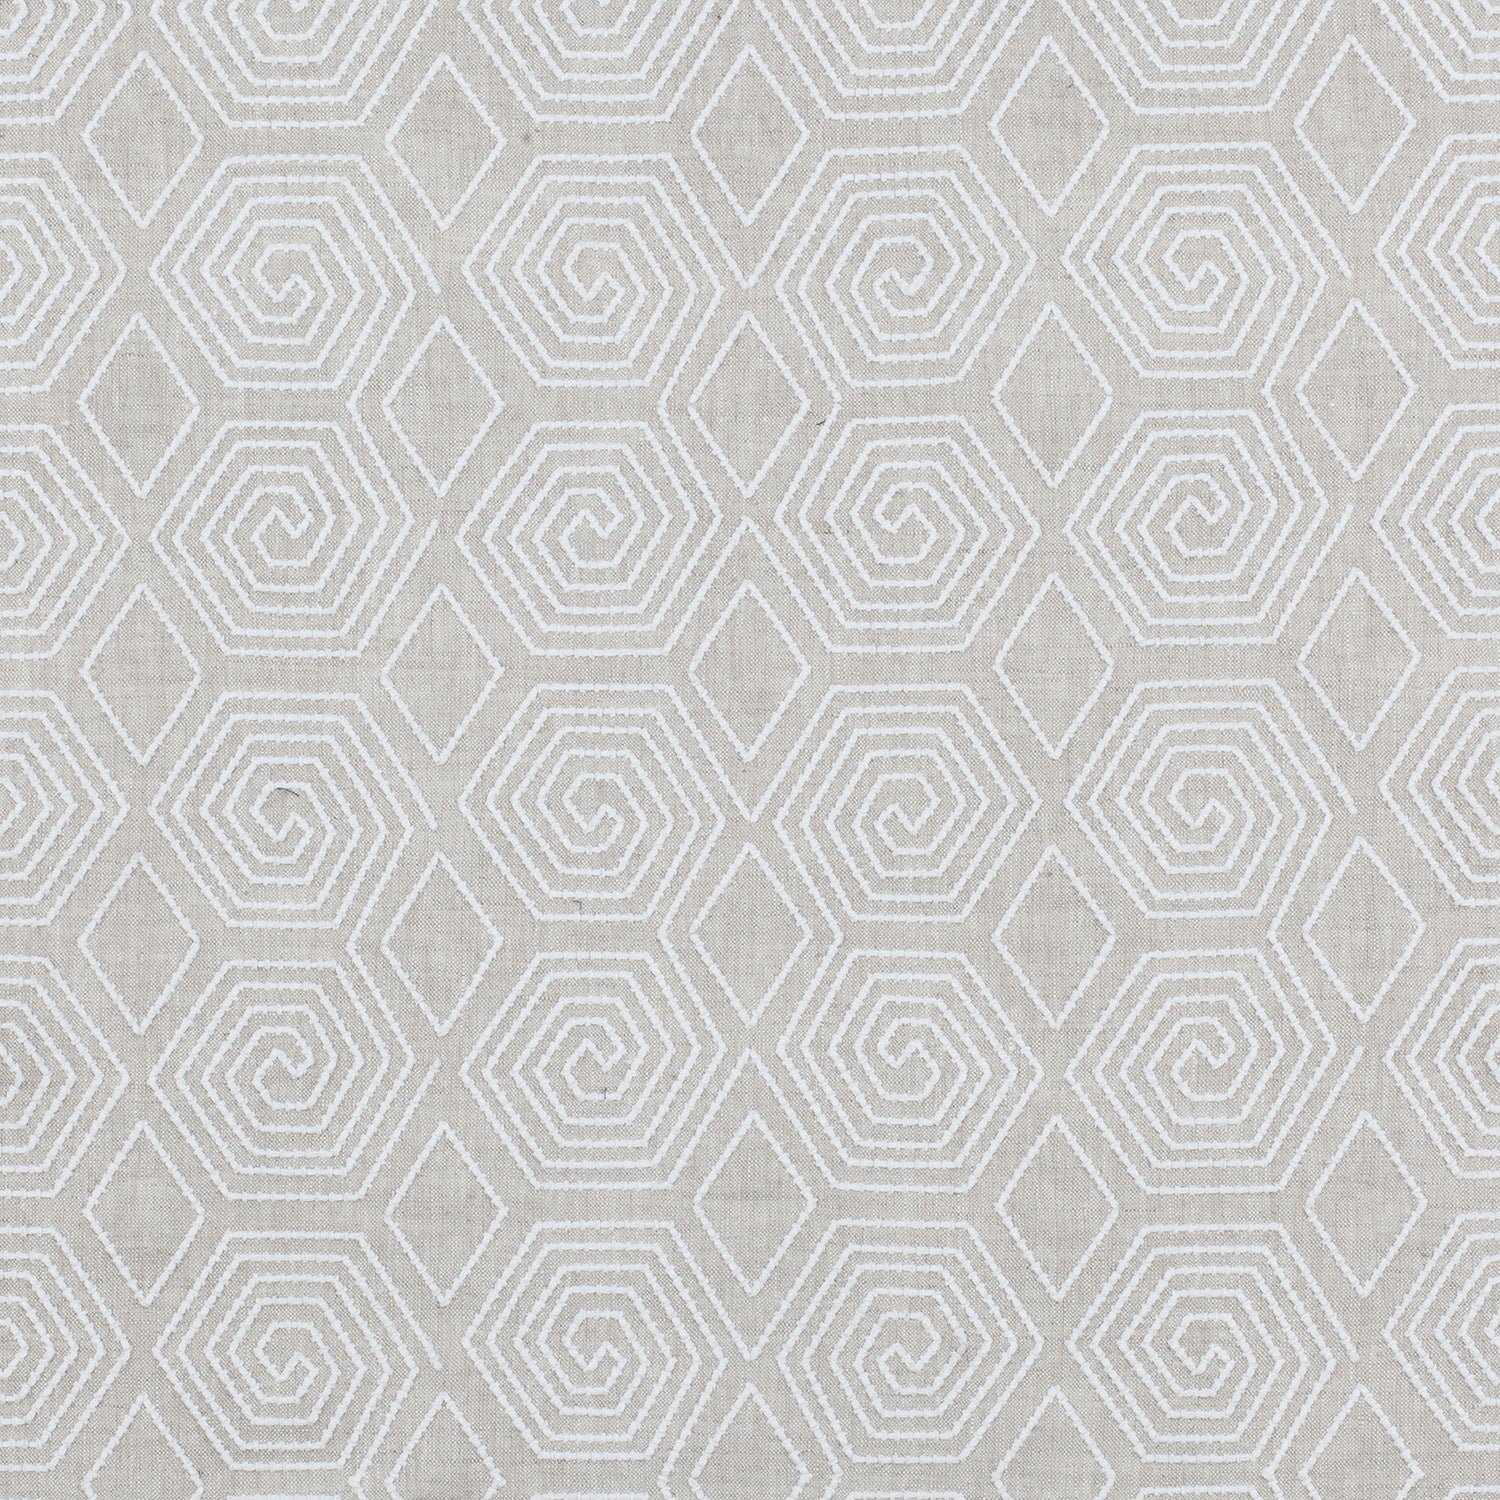 Fabric with a playful embroidered geometric grid print in white on a cream field.